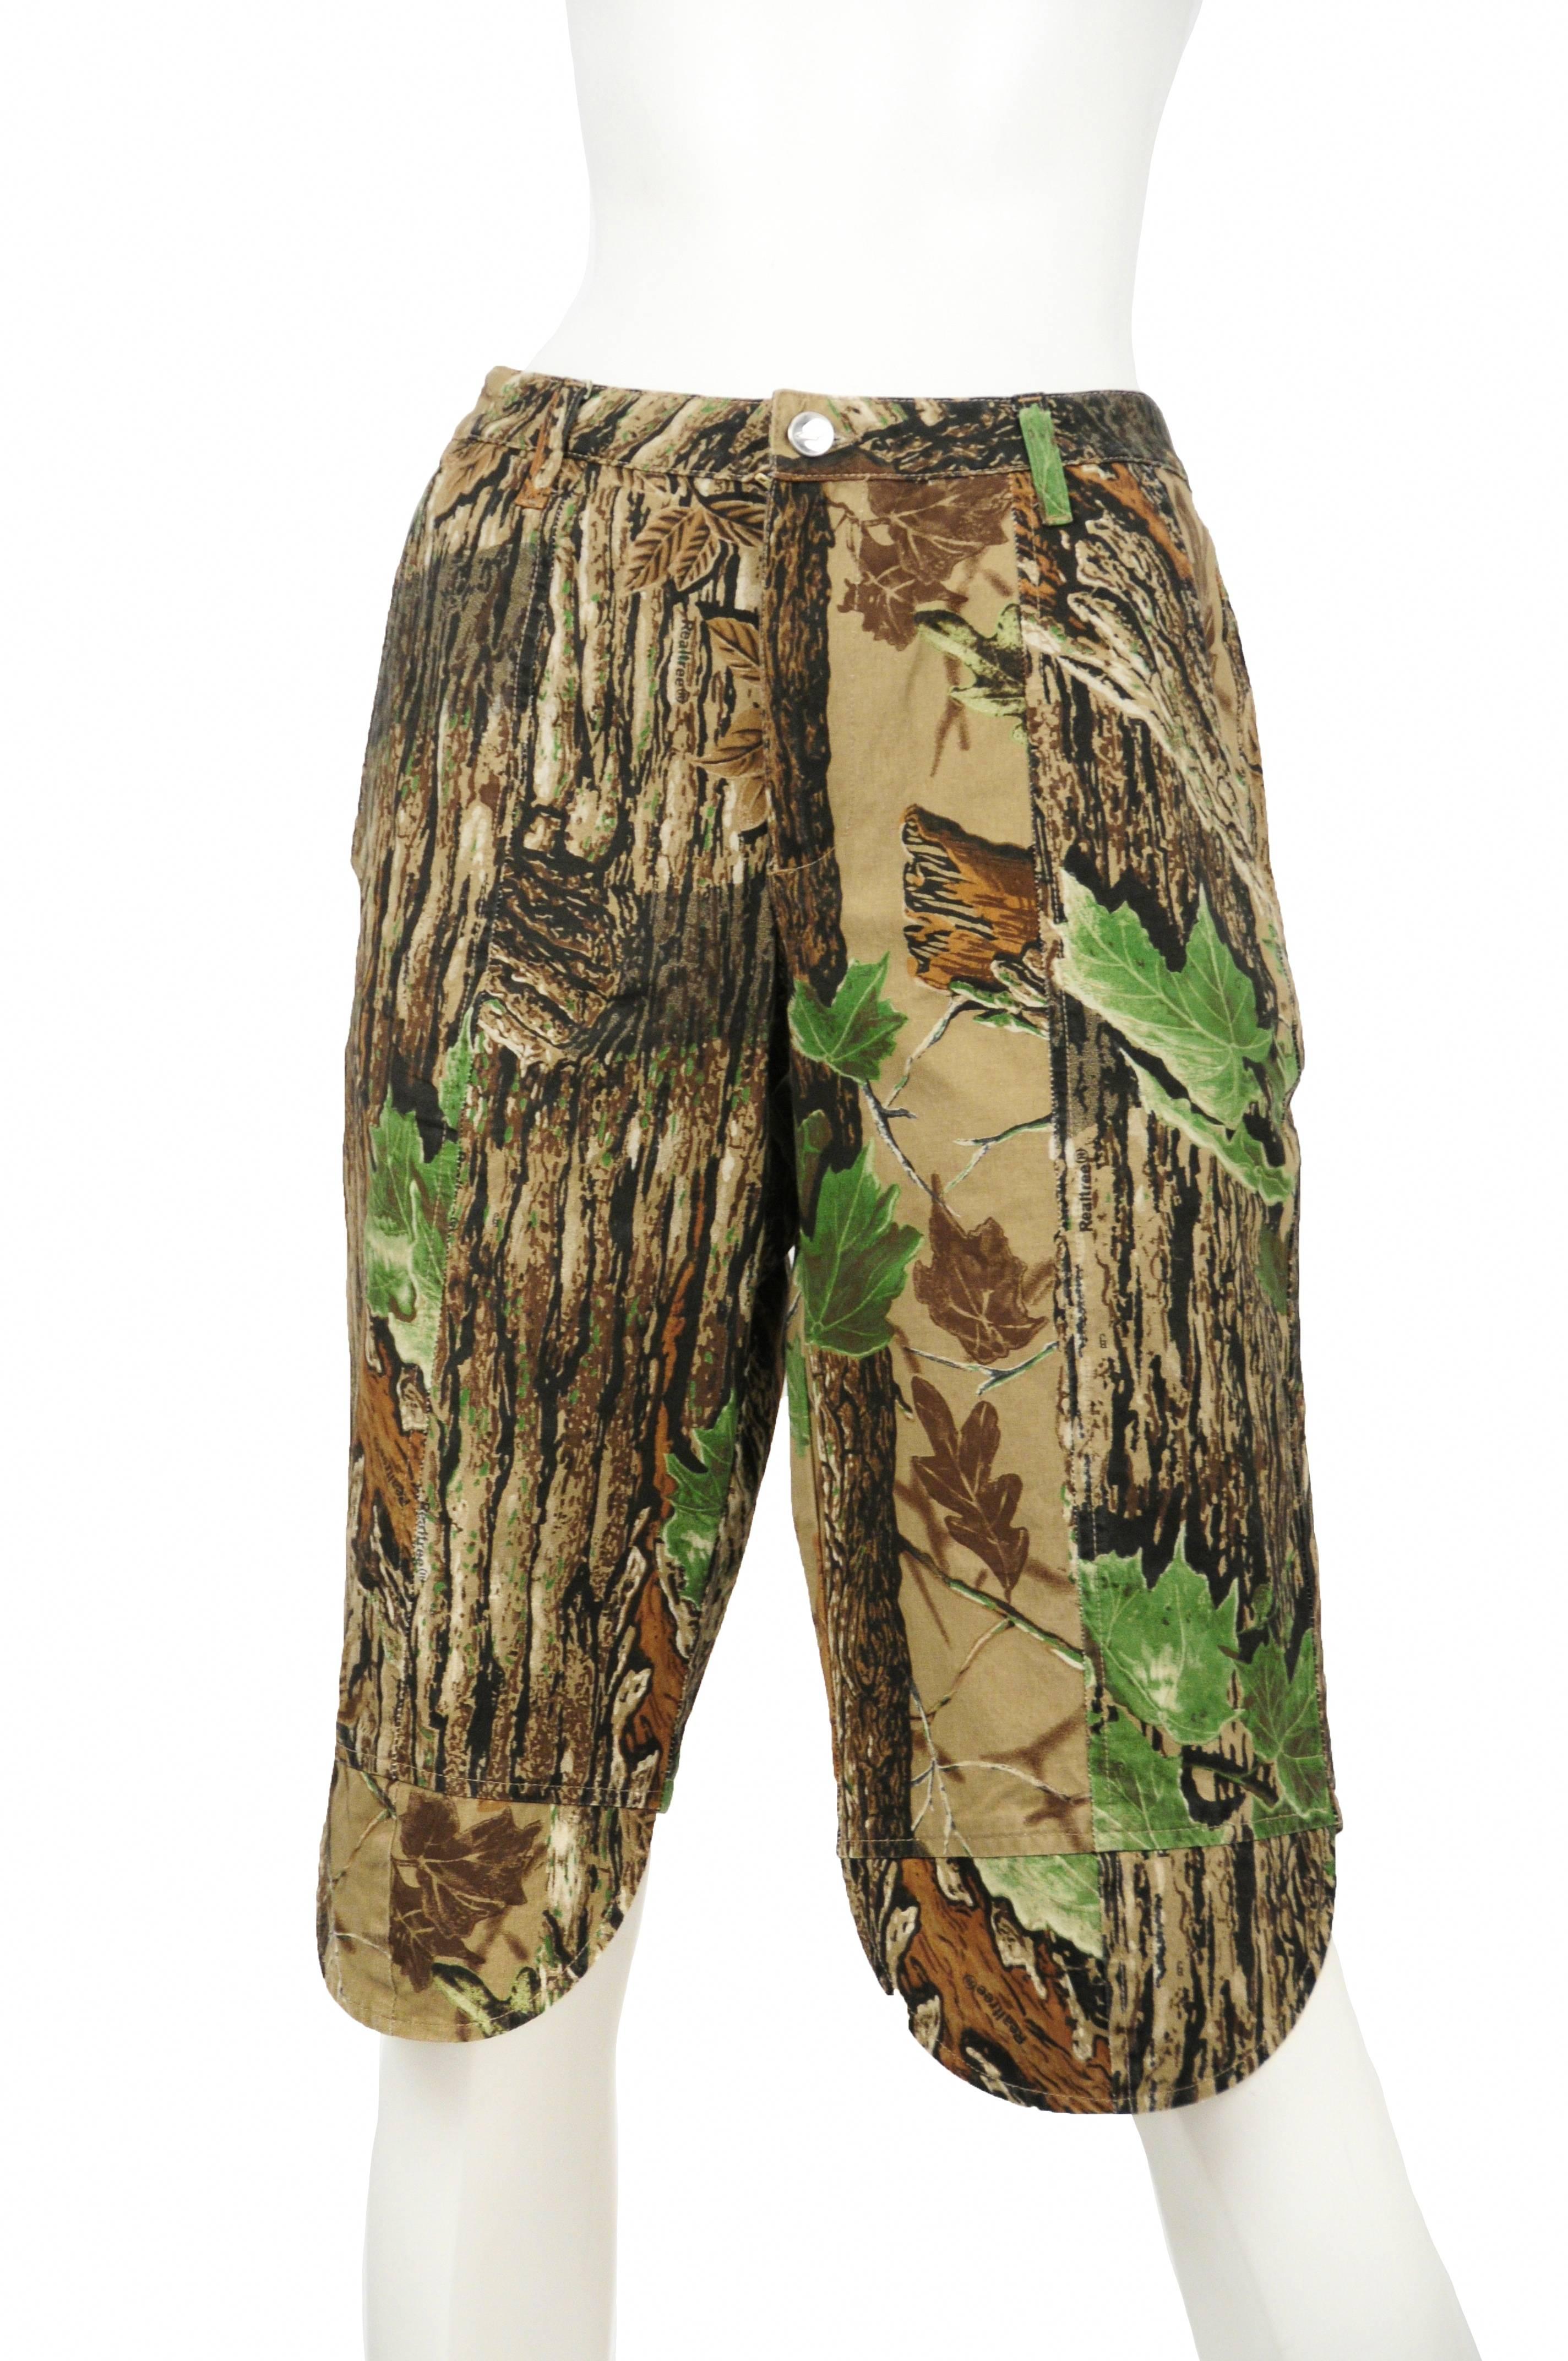 Vintage Wild and Lethal Trash cotton leaf print hunting shorts with front pockets and round extended knee flap designed. Circa 1999.